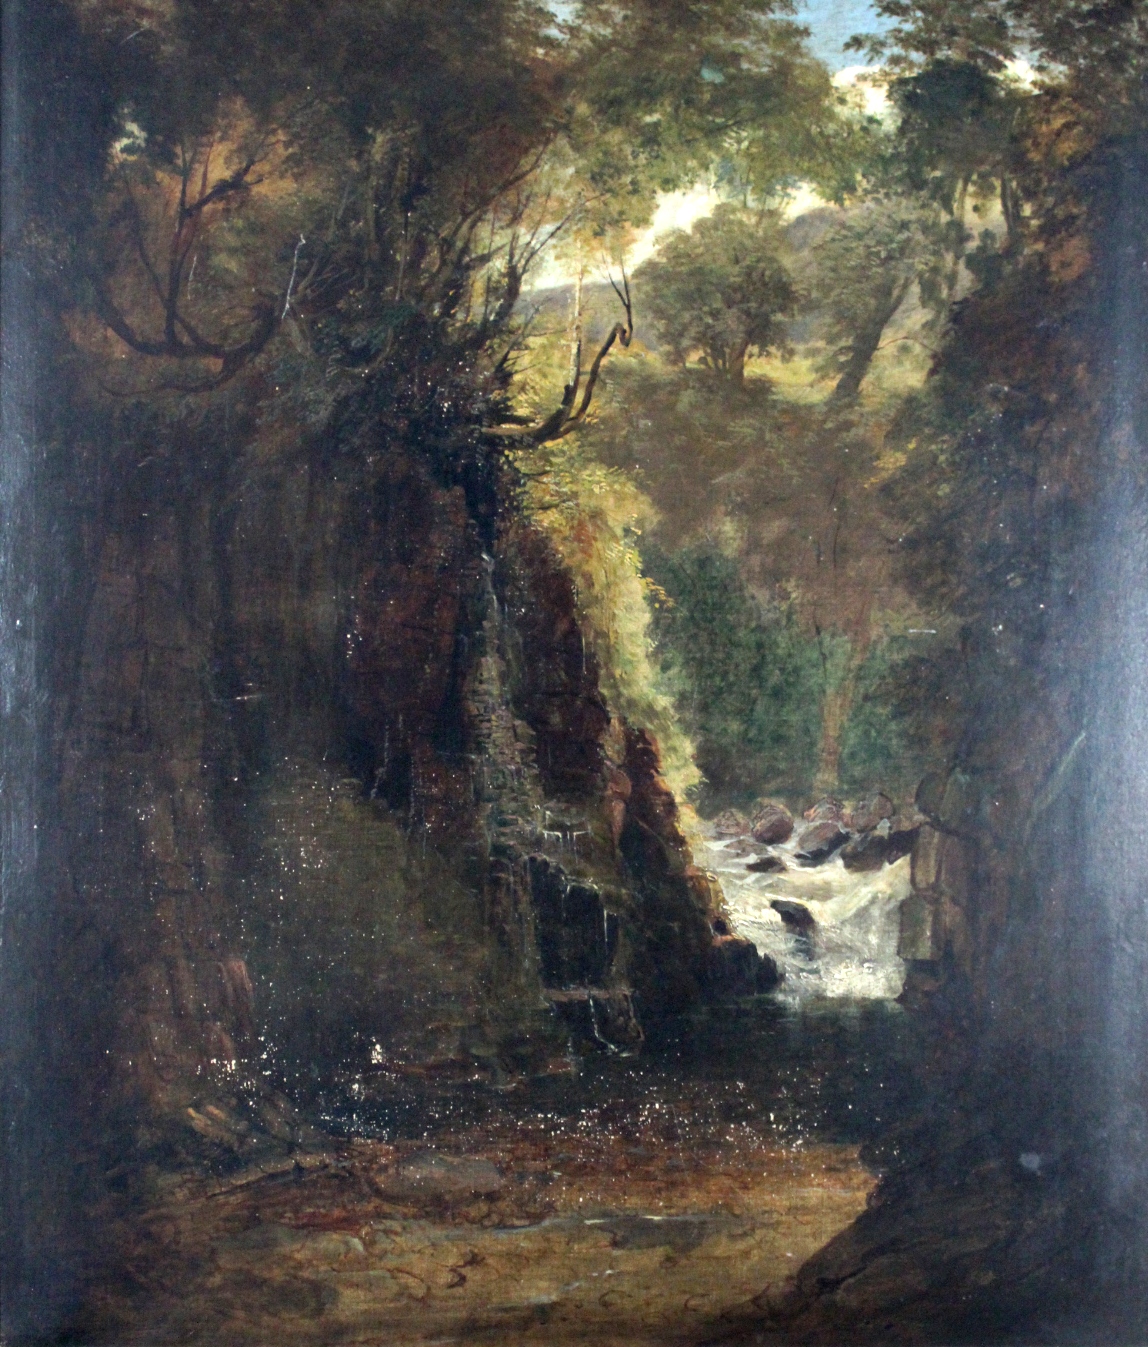 ATTRIBUTED TO FREDERICK RICHARD LEE, RA (1798-1879) A ROCKY WOODED GORGE Oil on canvas 79 x 67.